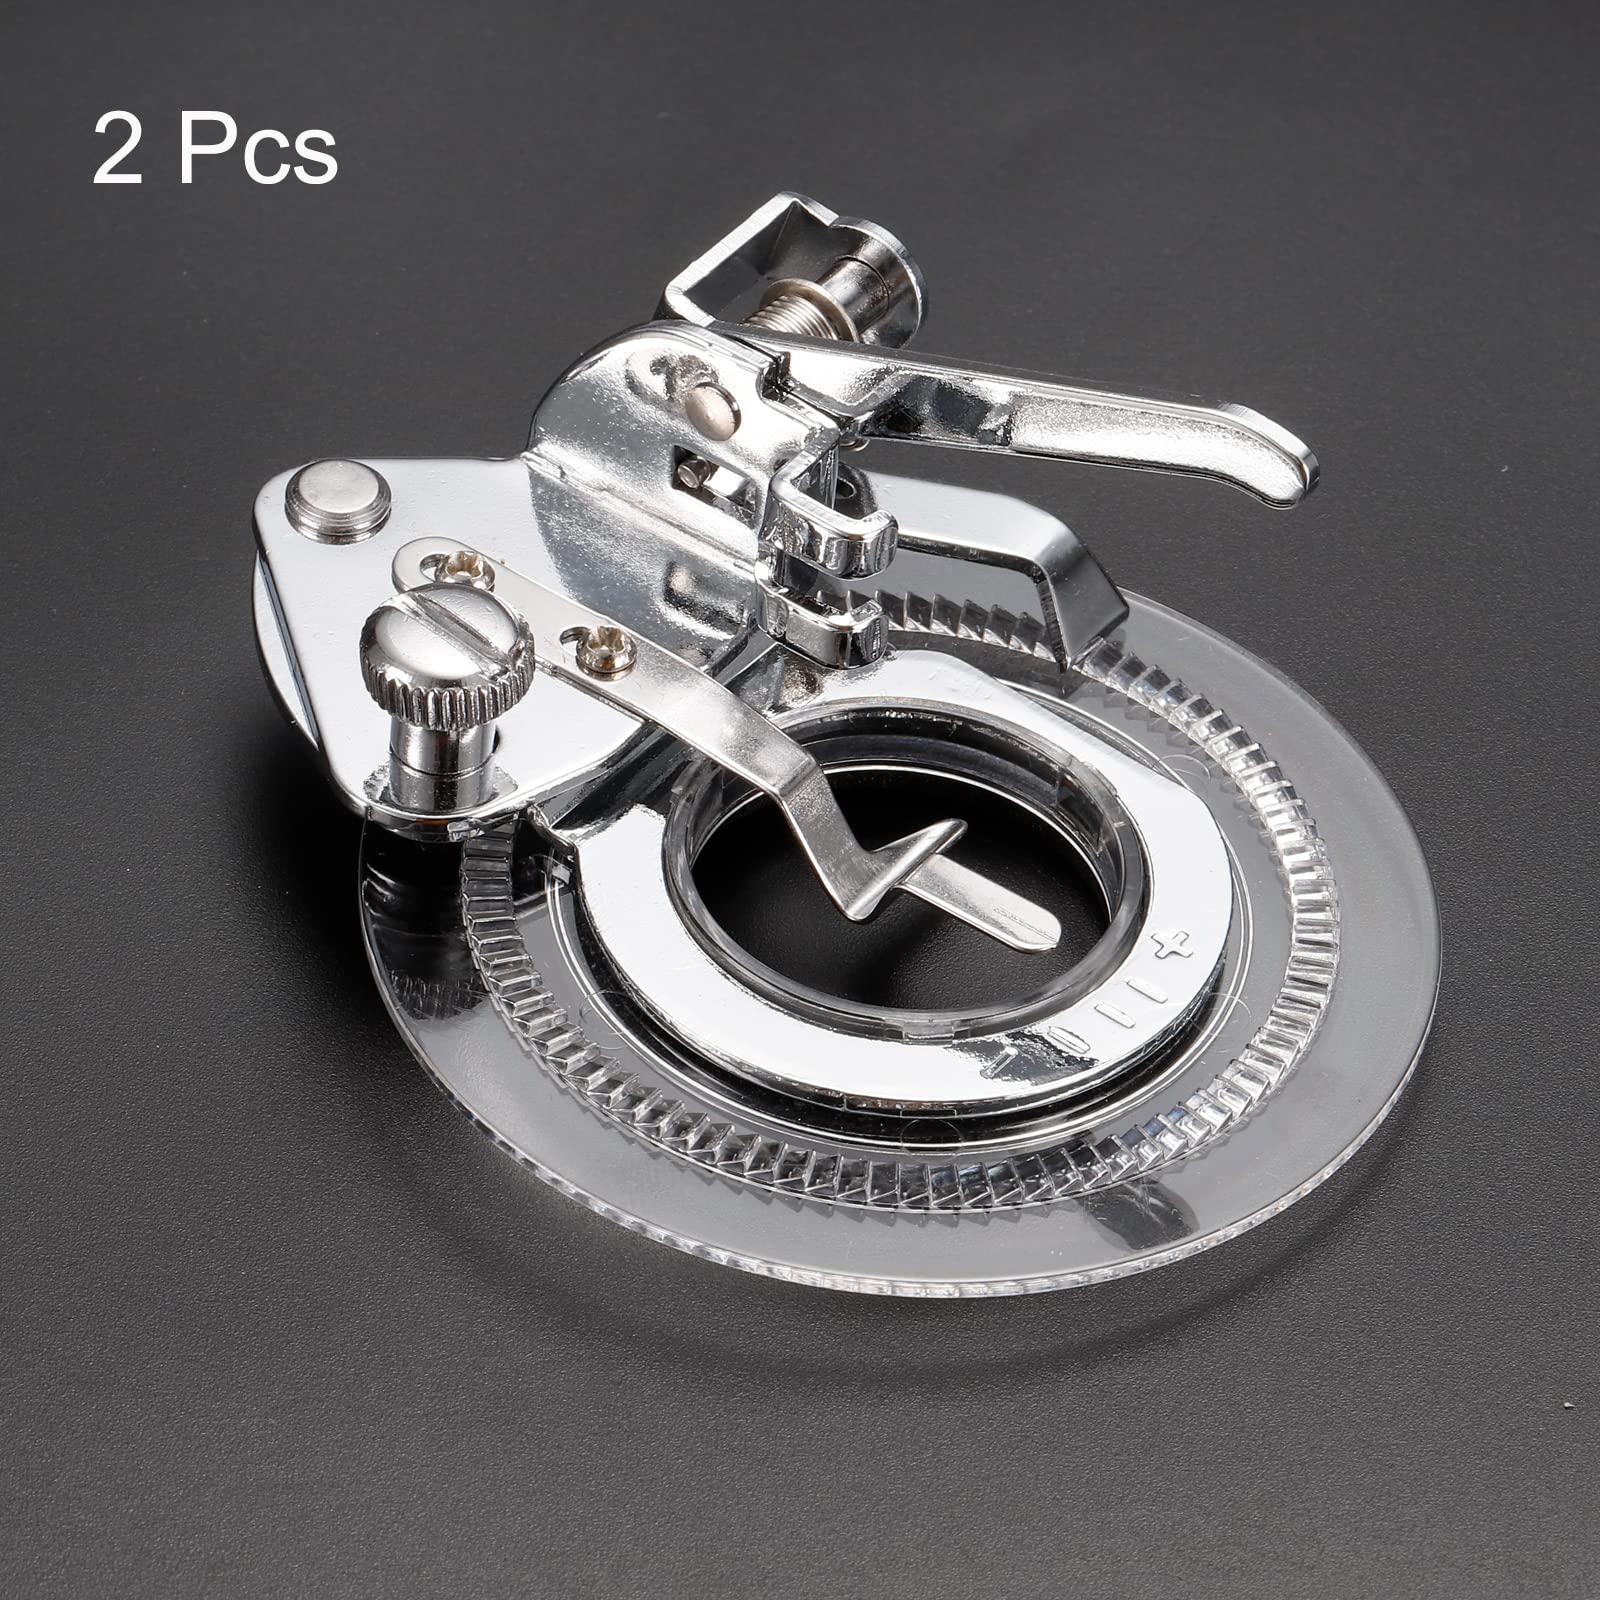 sourcing map Practical Circular Embroidery Round Foot Daisy Flower Stitch Disc Pattern Sewing Machine Foot, Sewing Machine Replace Accessories, 2Pcs 2